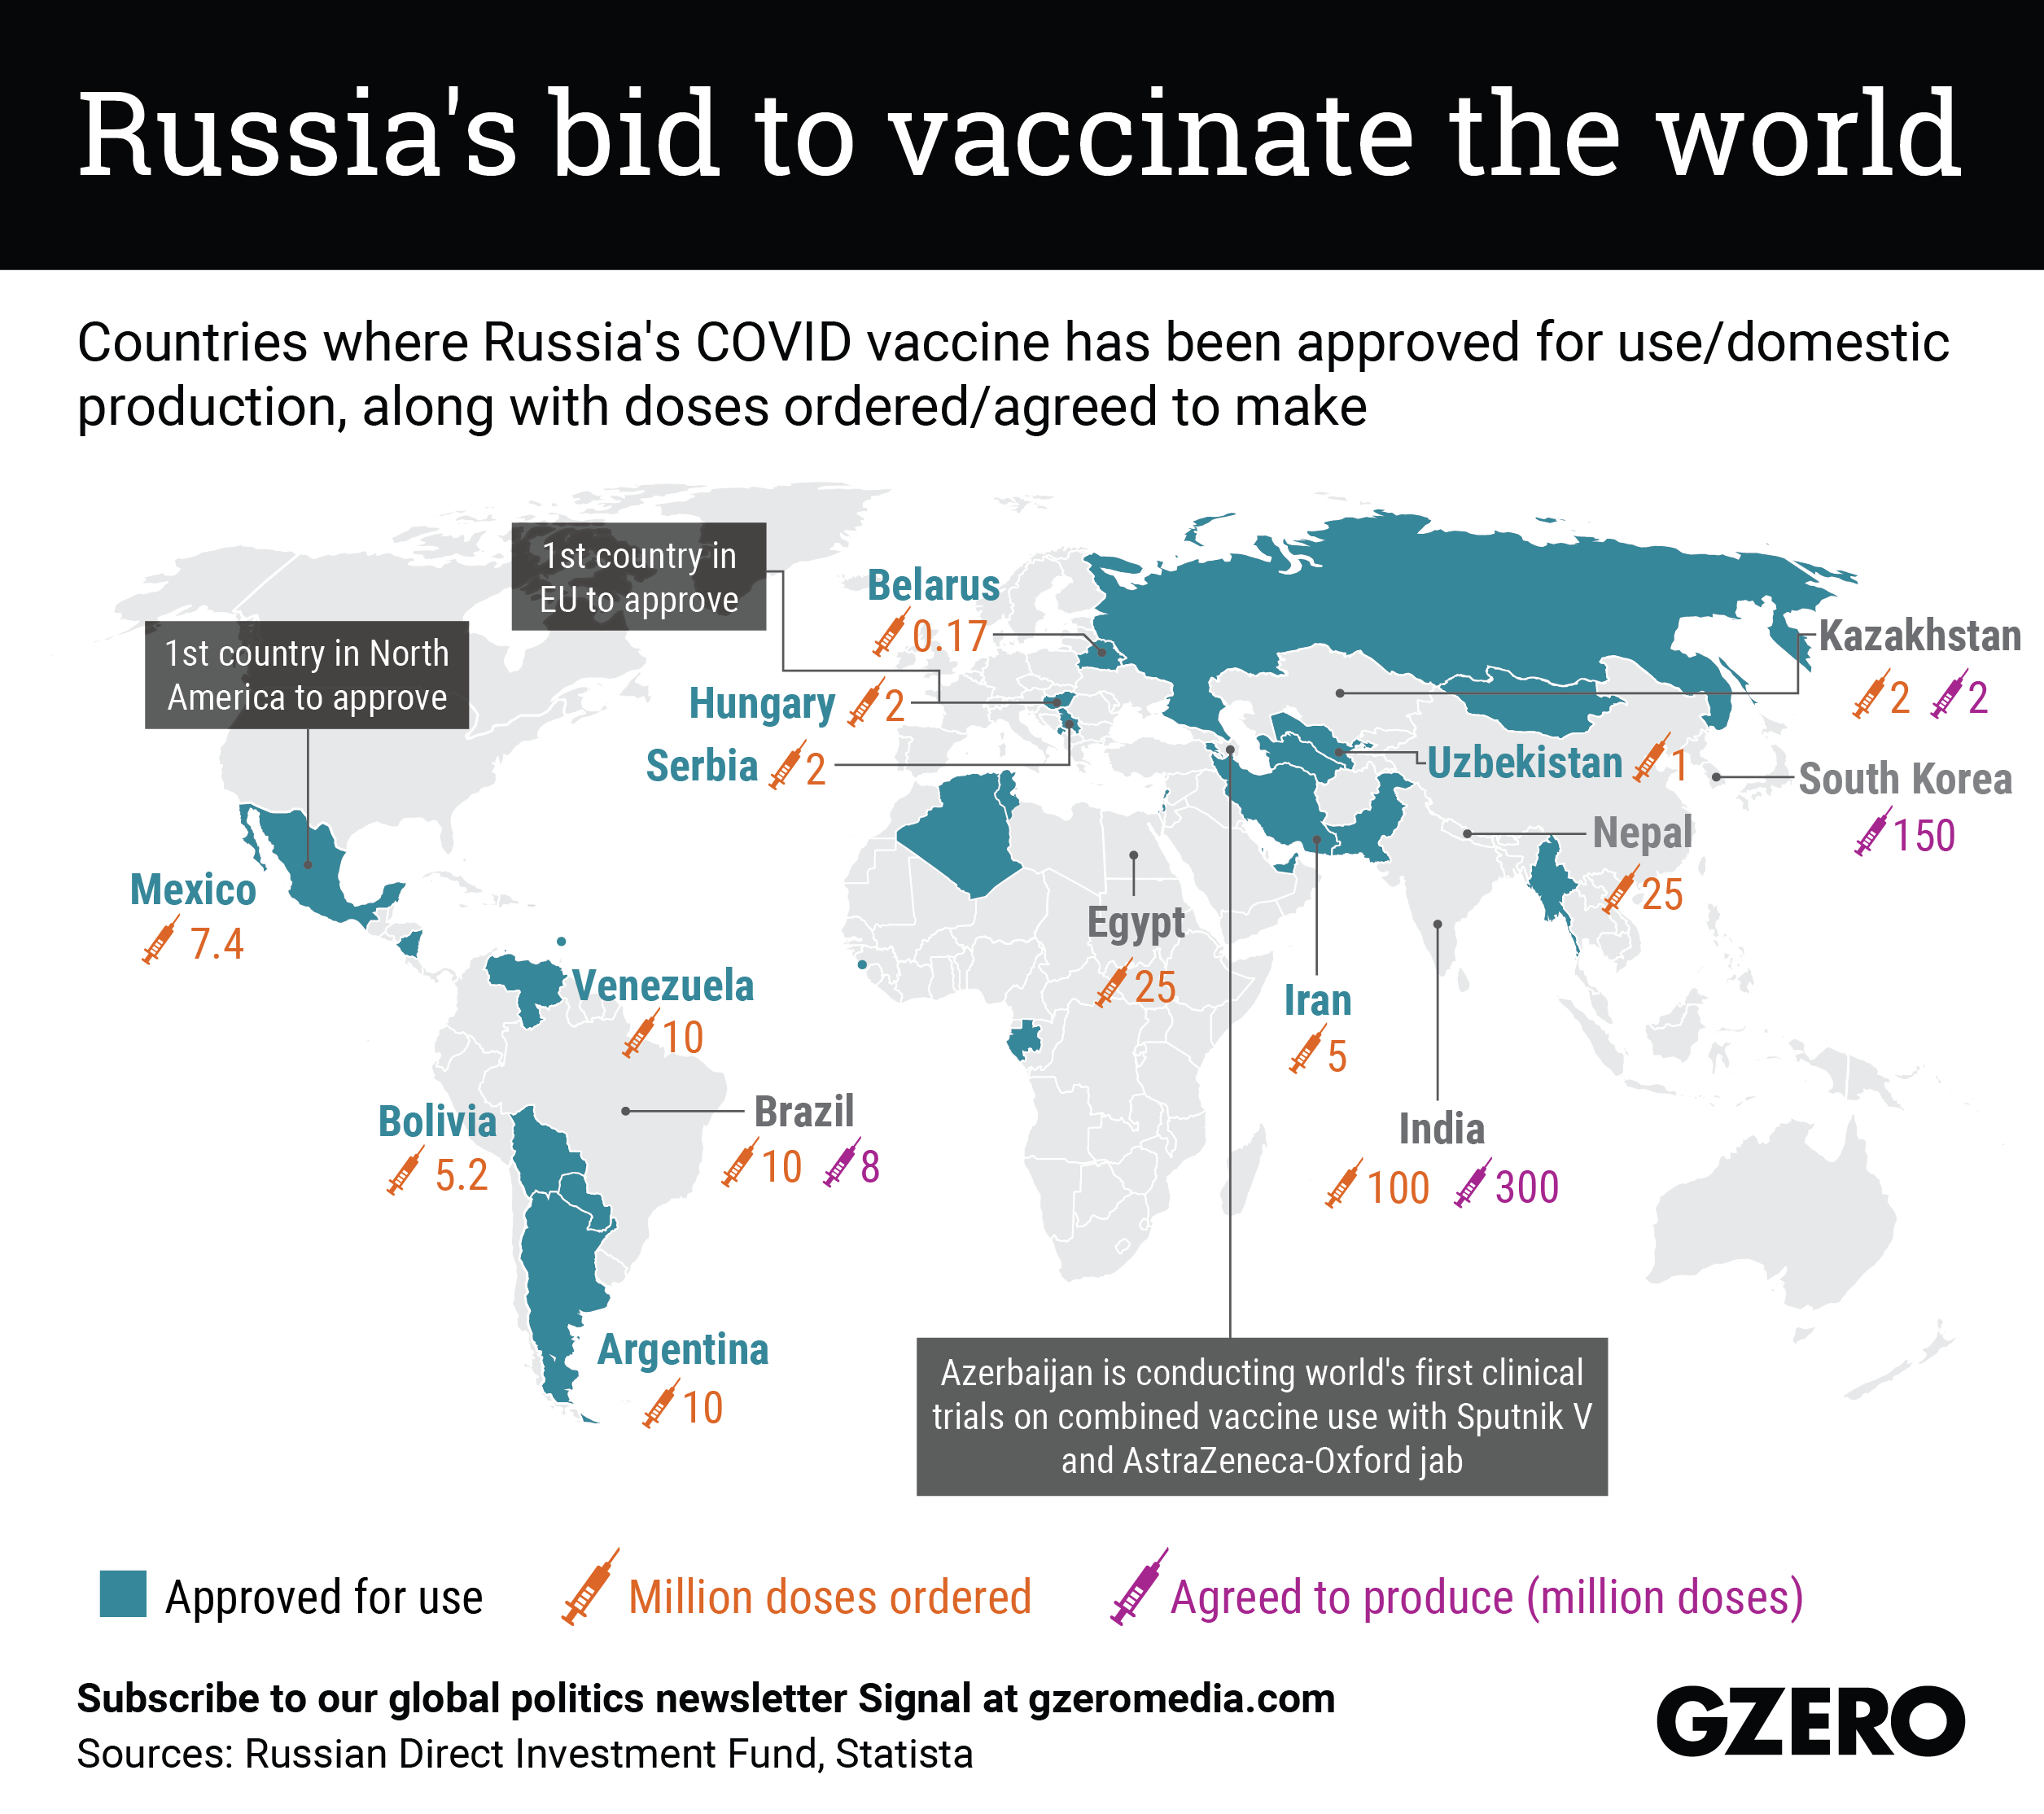 The Graphic Truth: Russia's bid to vaccinate the world